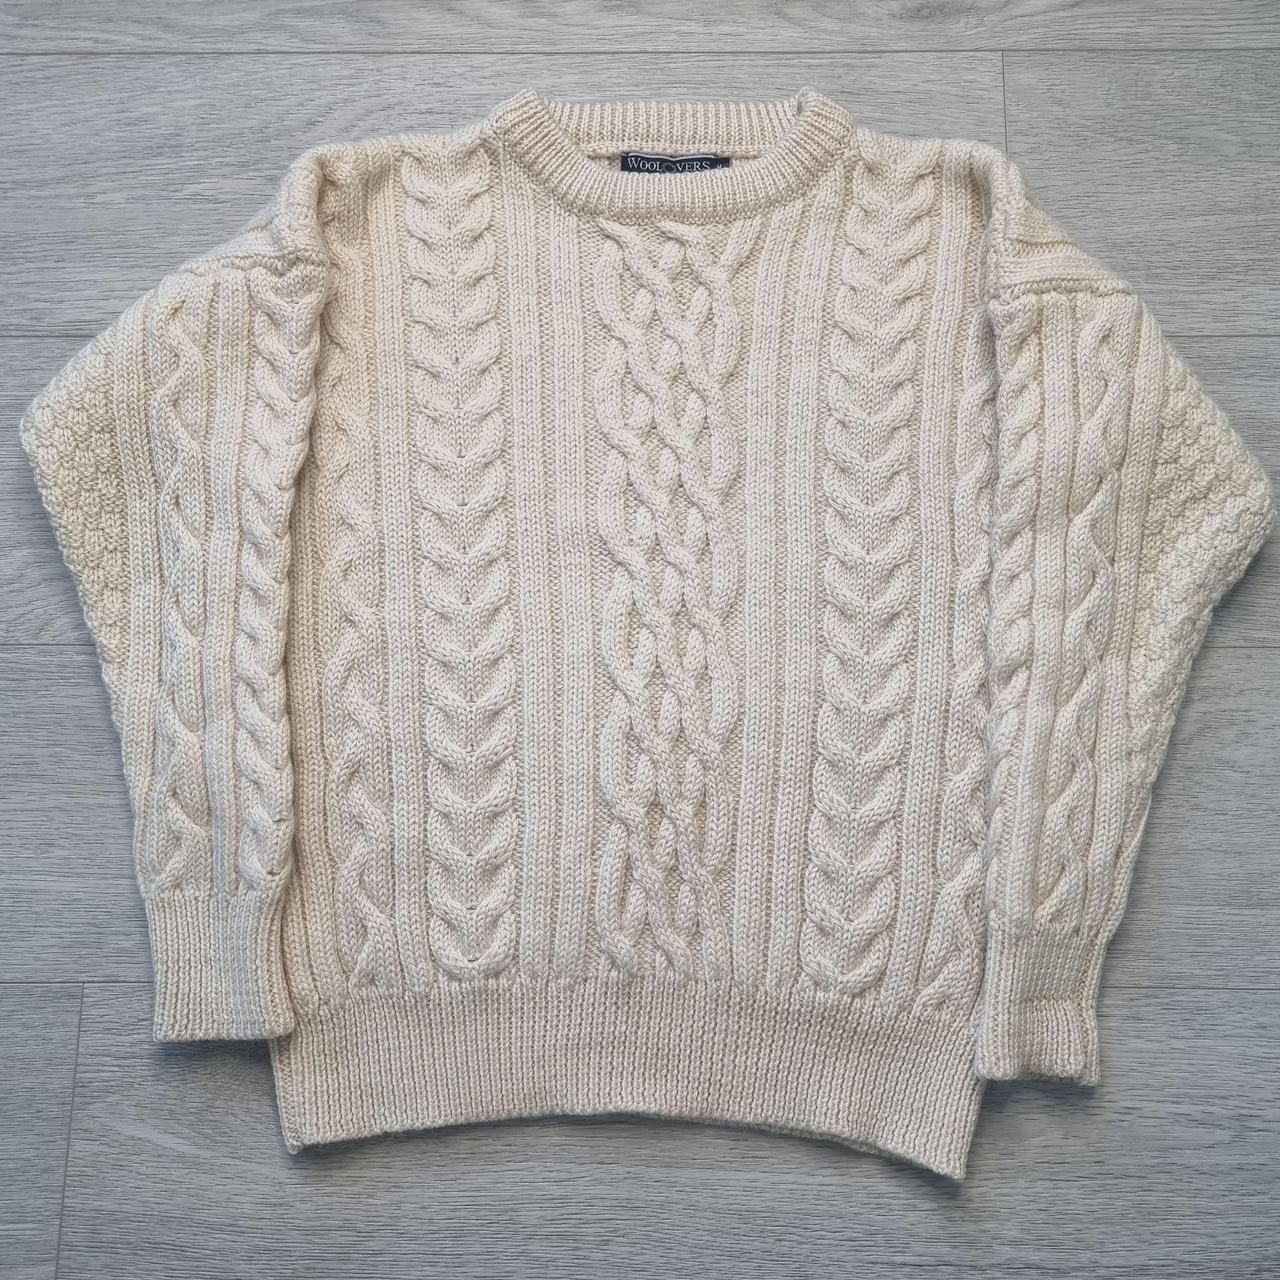 Woolovers Jumper Aran Cream Cable Chunky Knit... - Depop